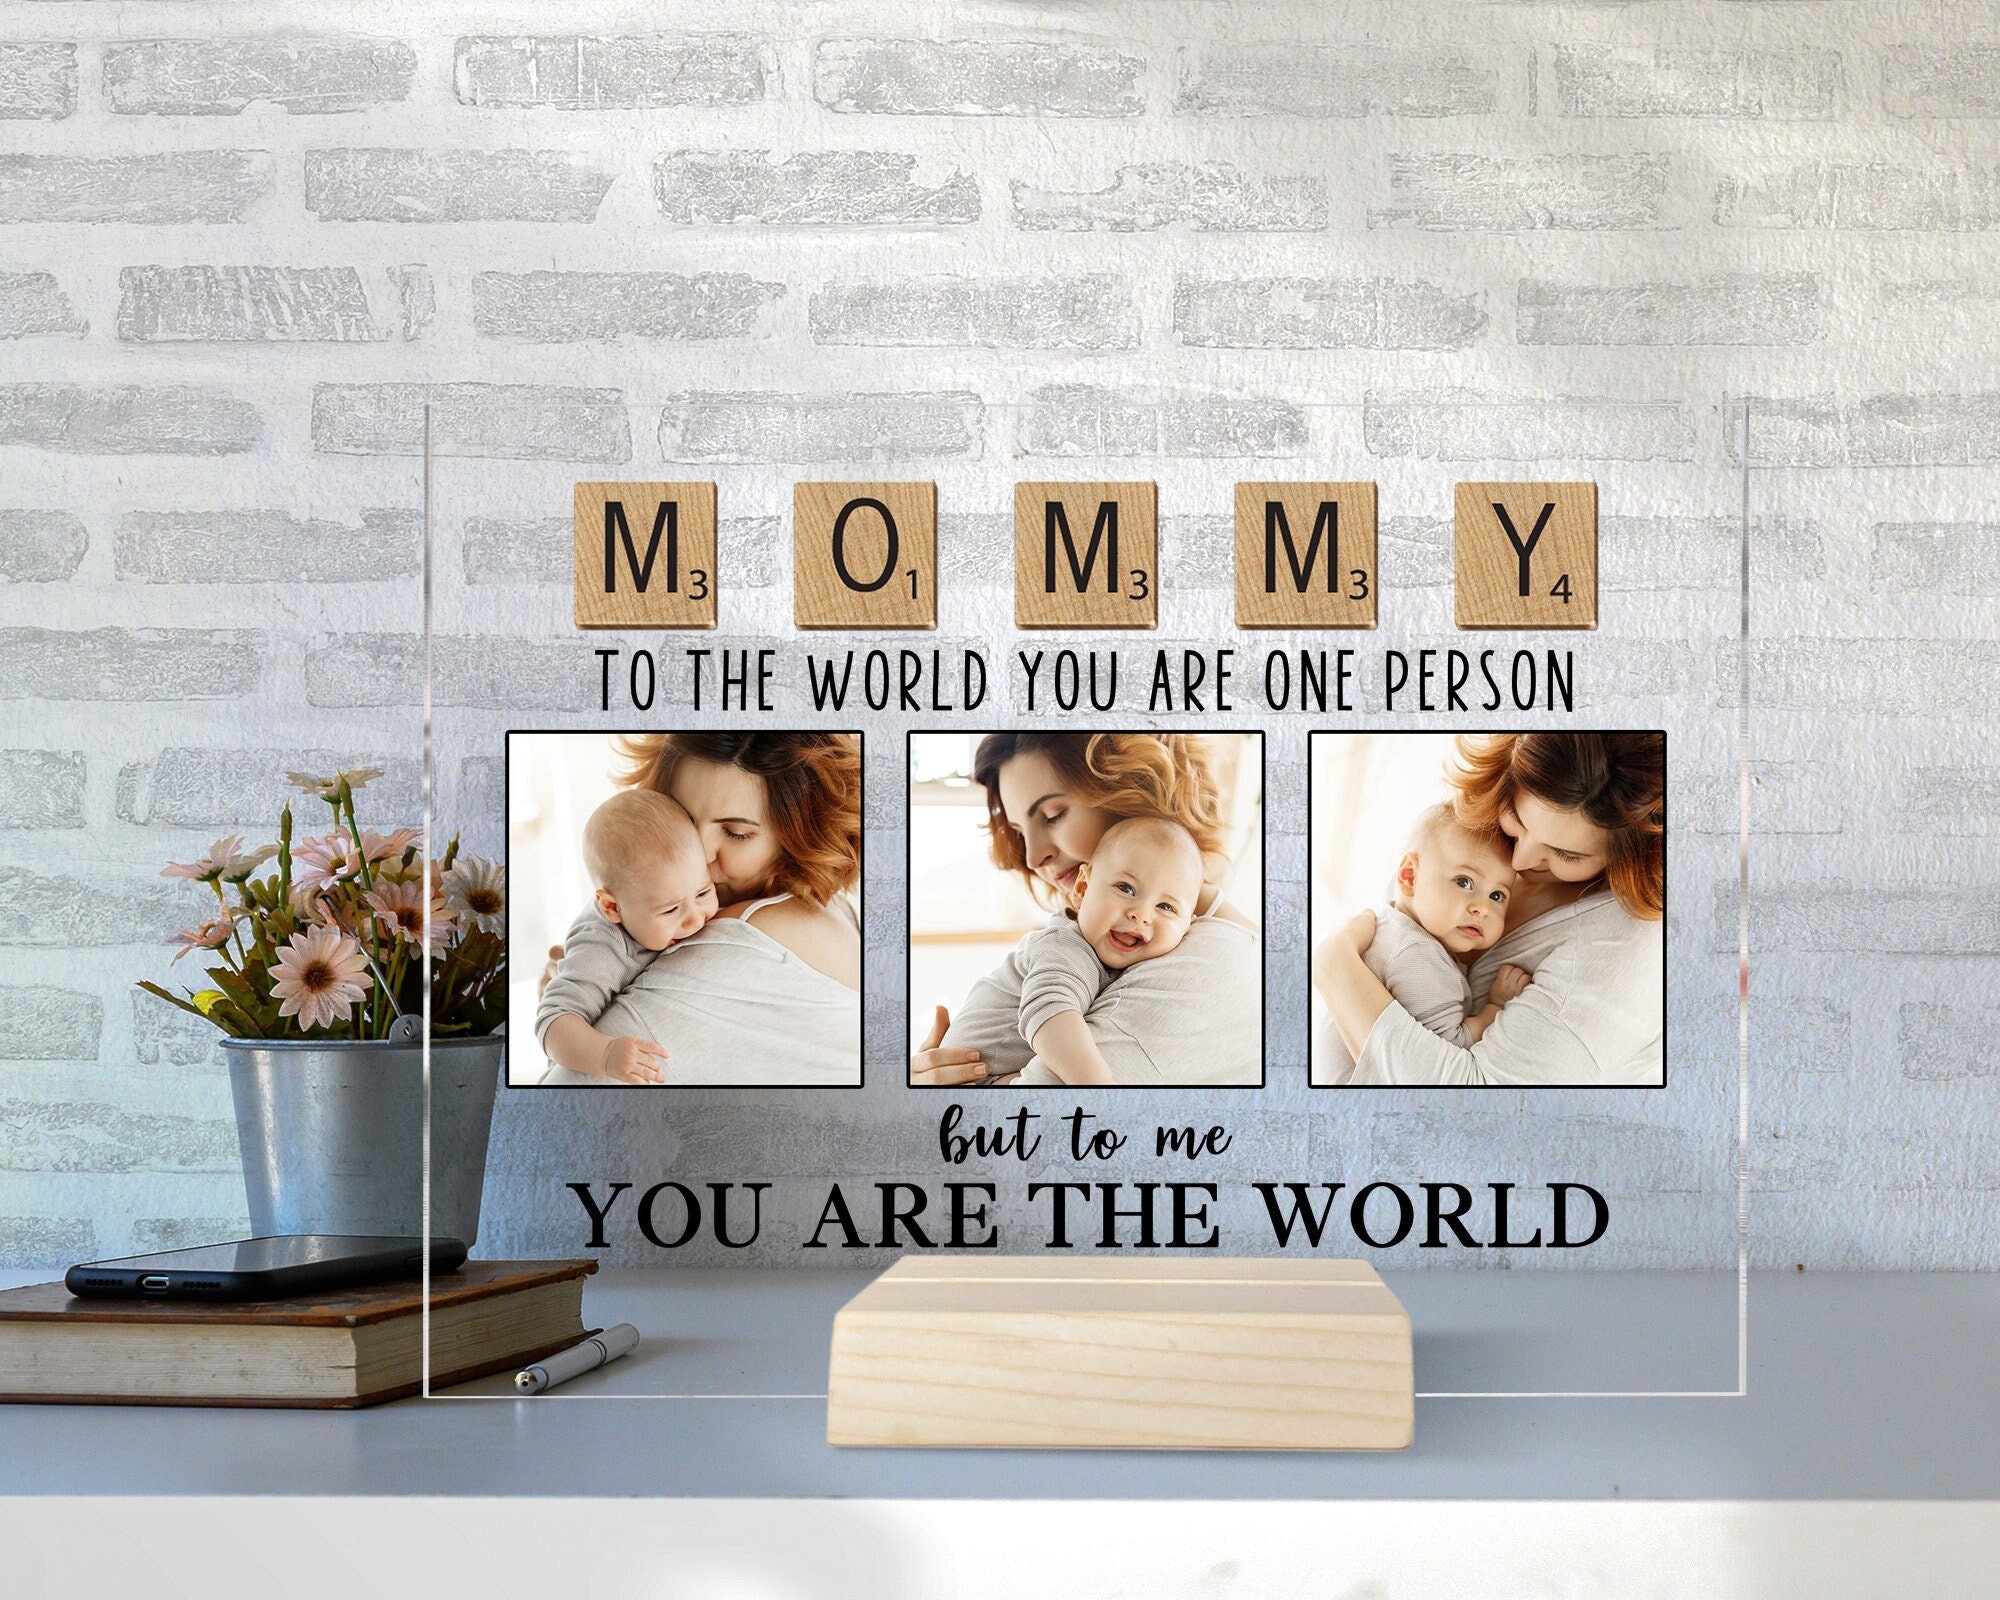  TRUMPETIC Mothers Day Gifts, Personalized To My Mom Plaque,  Gifts For Mom From Son Unique, Birthday Gifts For Mom from Son, Mom Gifts  From Son, Mom Gifts From Sons, 3 Layer